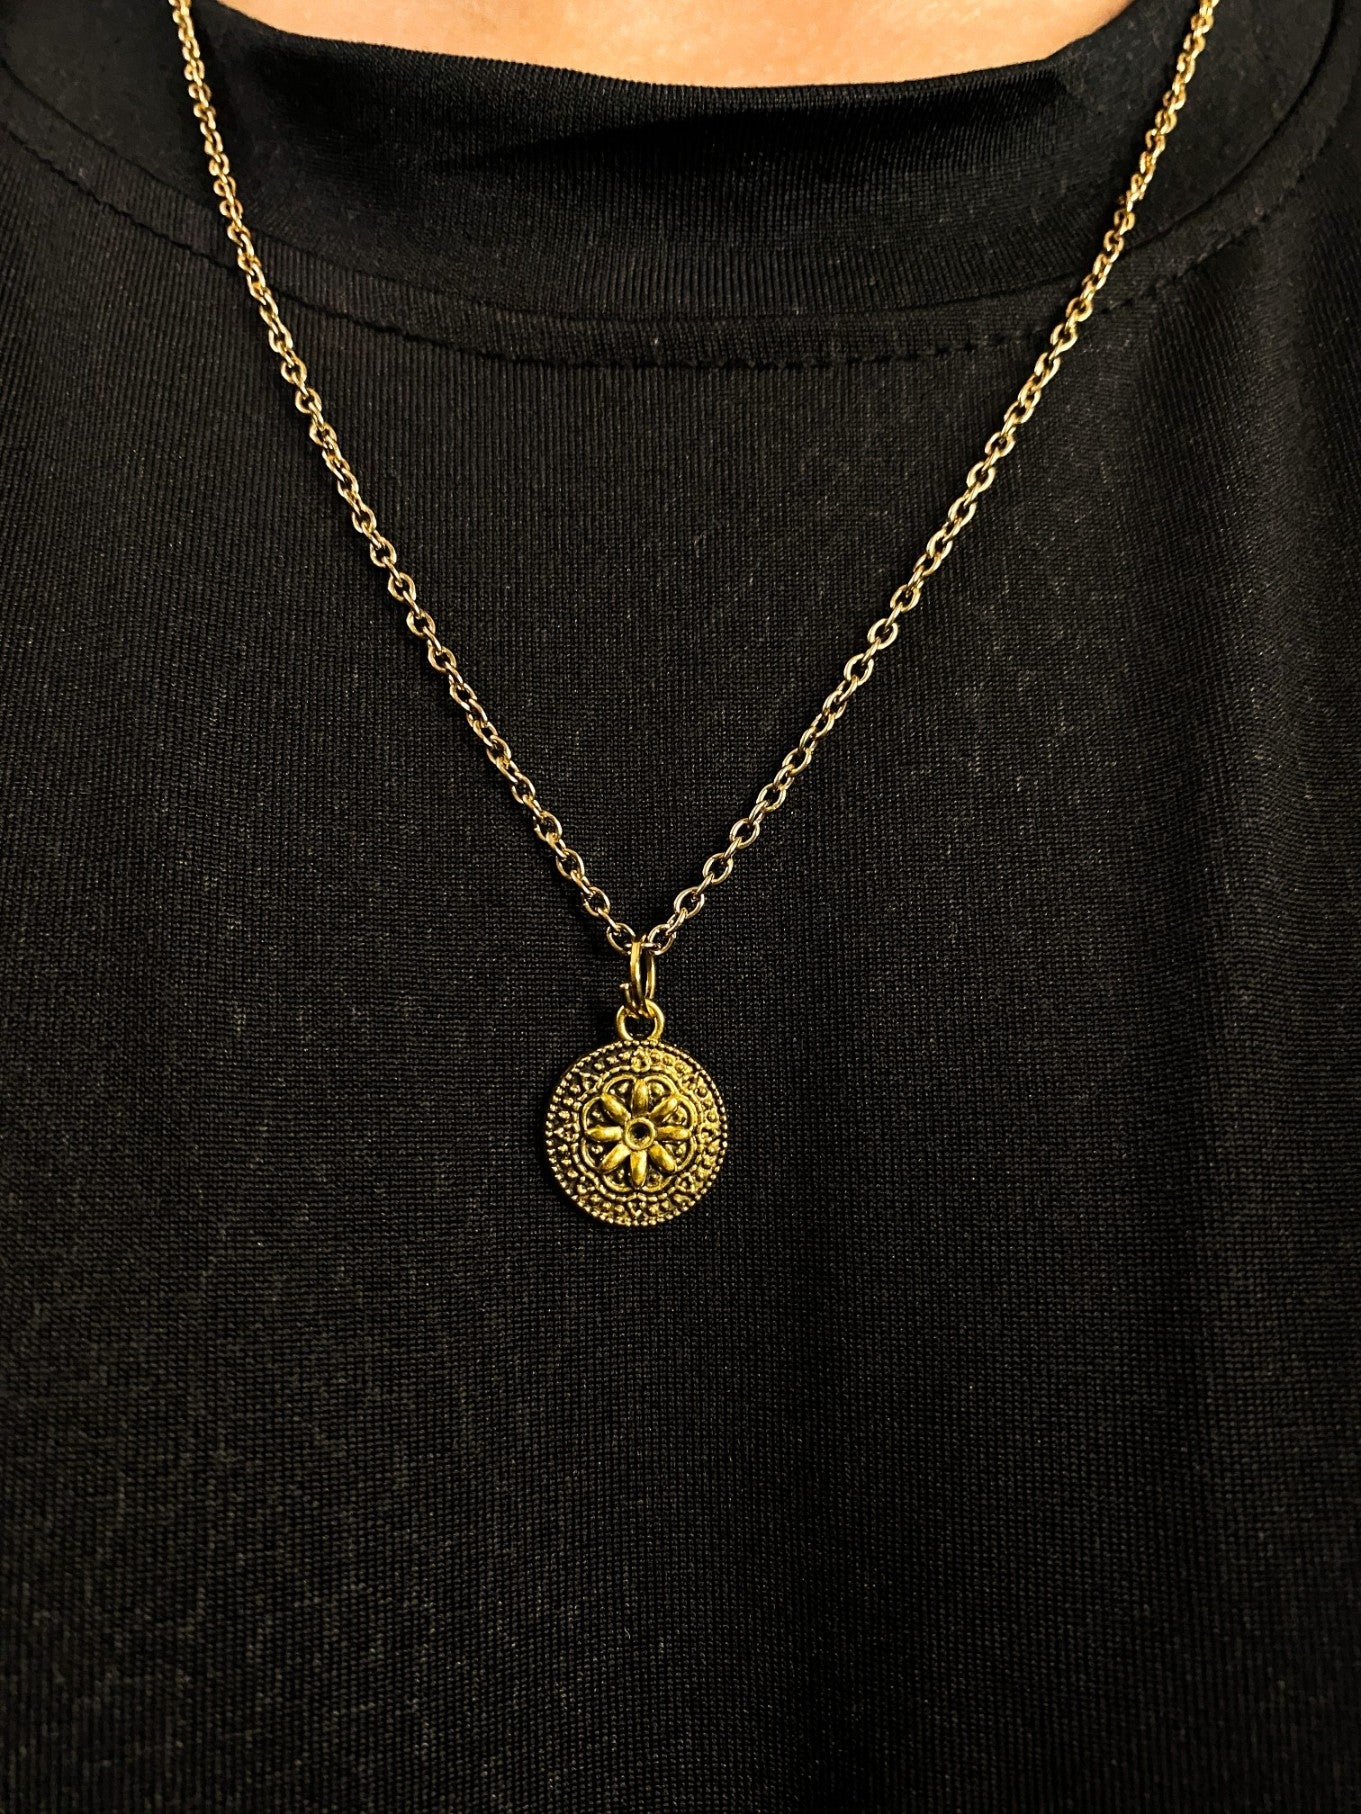 Golden 3D Flower Coin Pendant With Chain